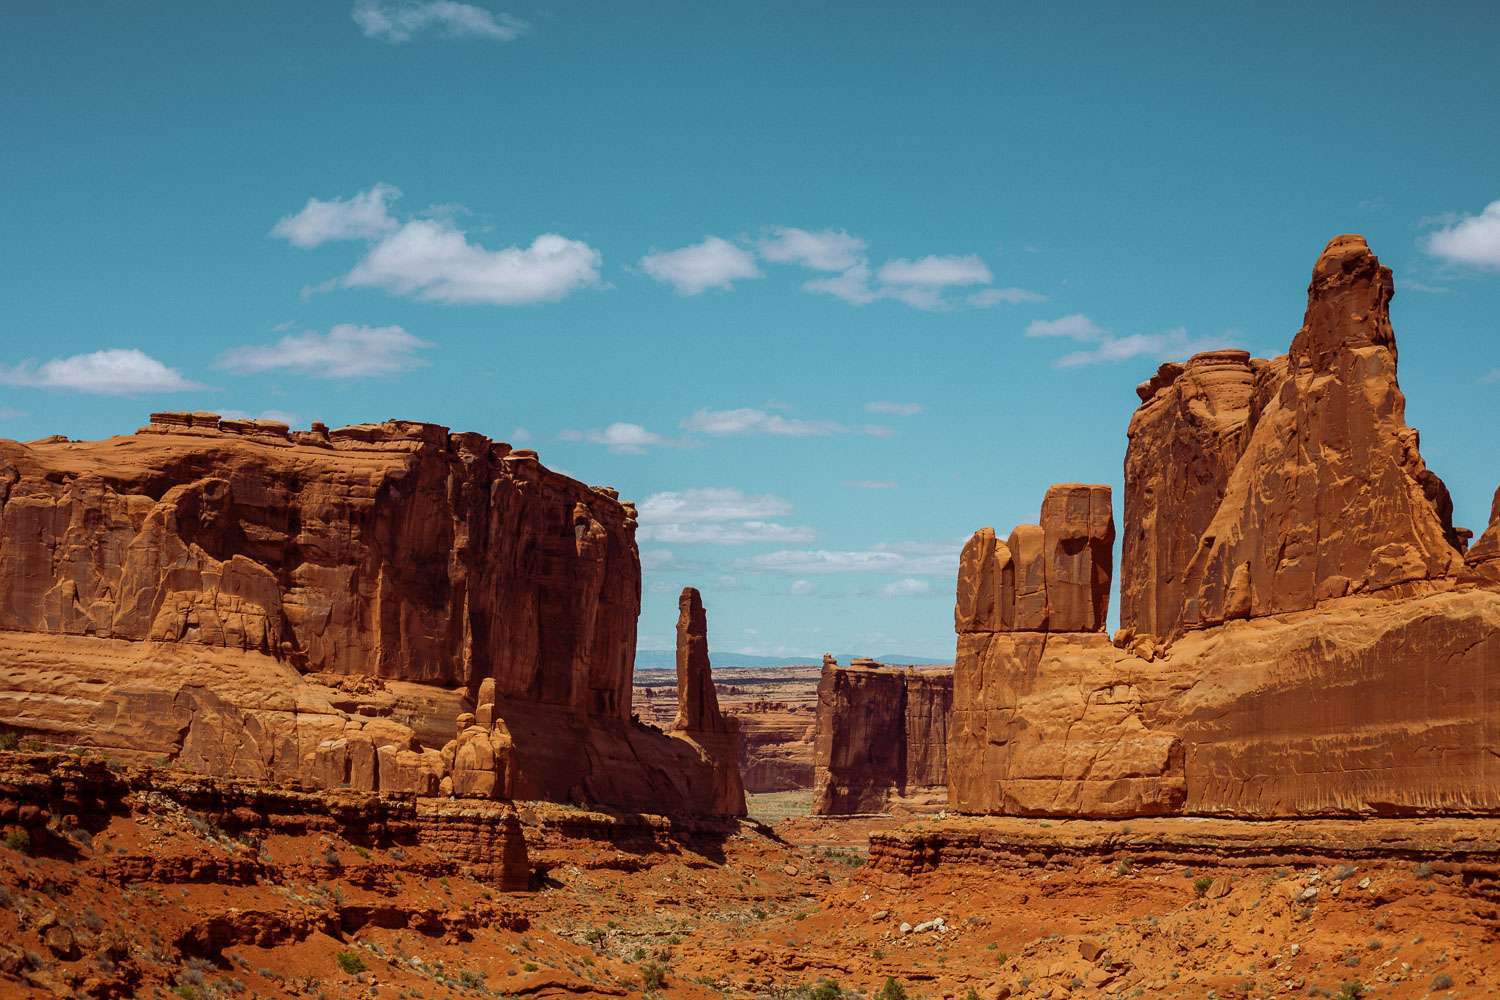 Rachel Off Duty: Scenic Red Rock Landscapes in Arches National Park